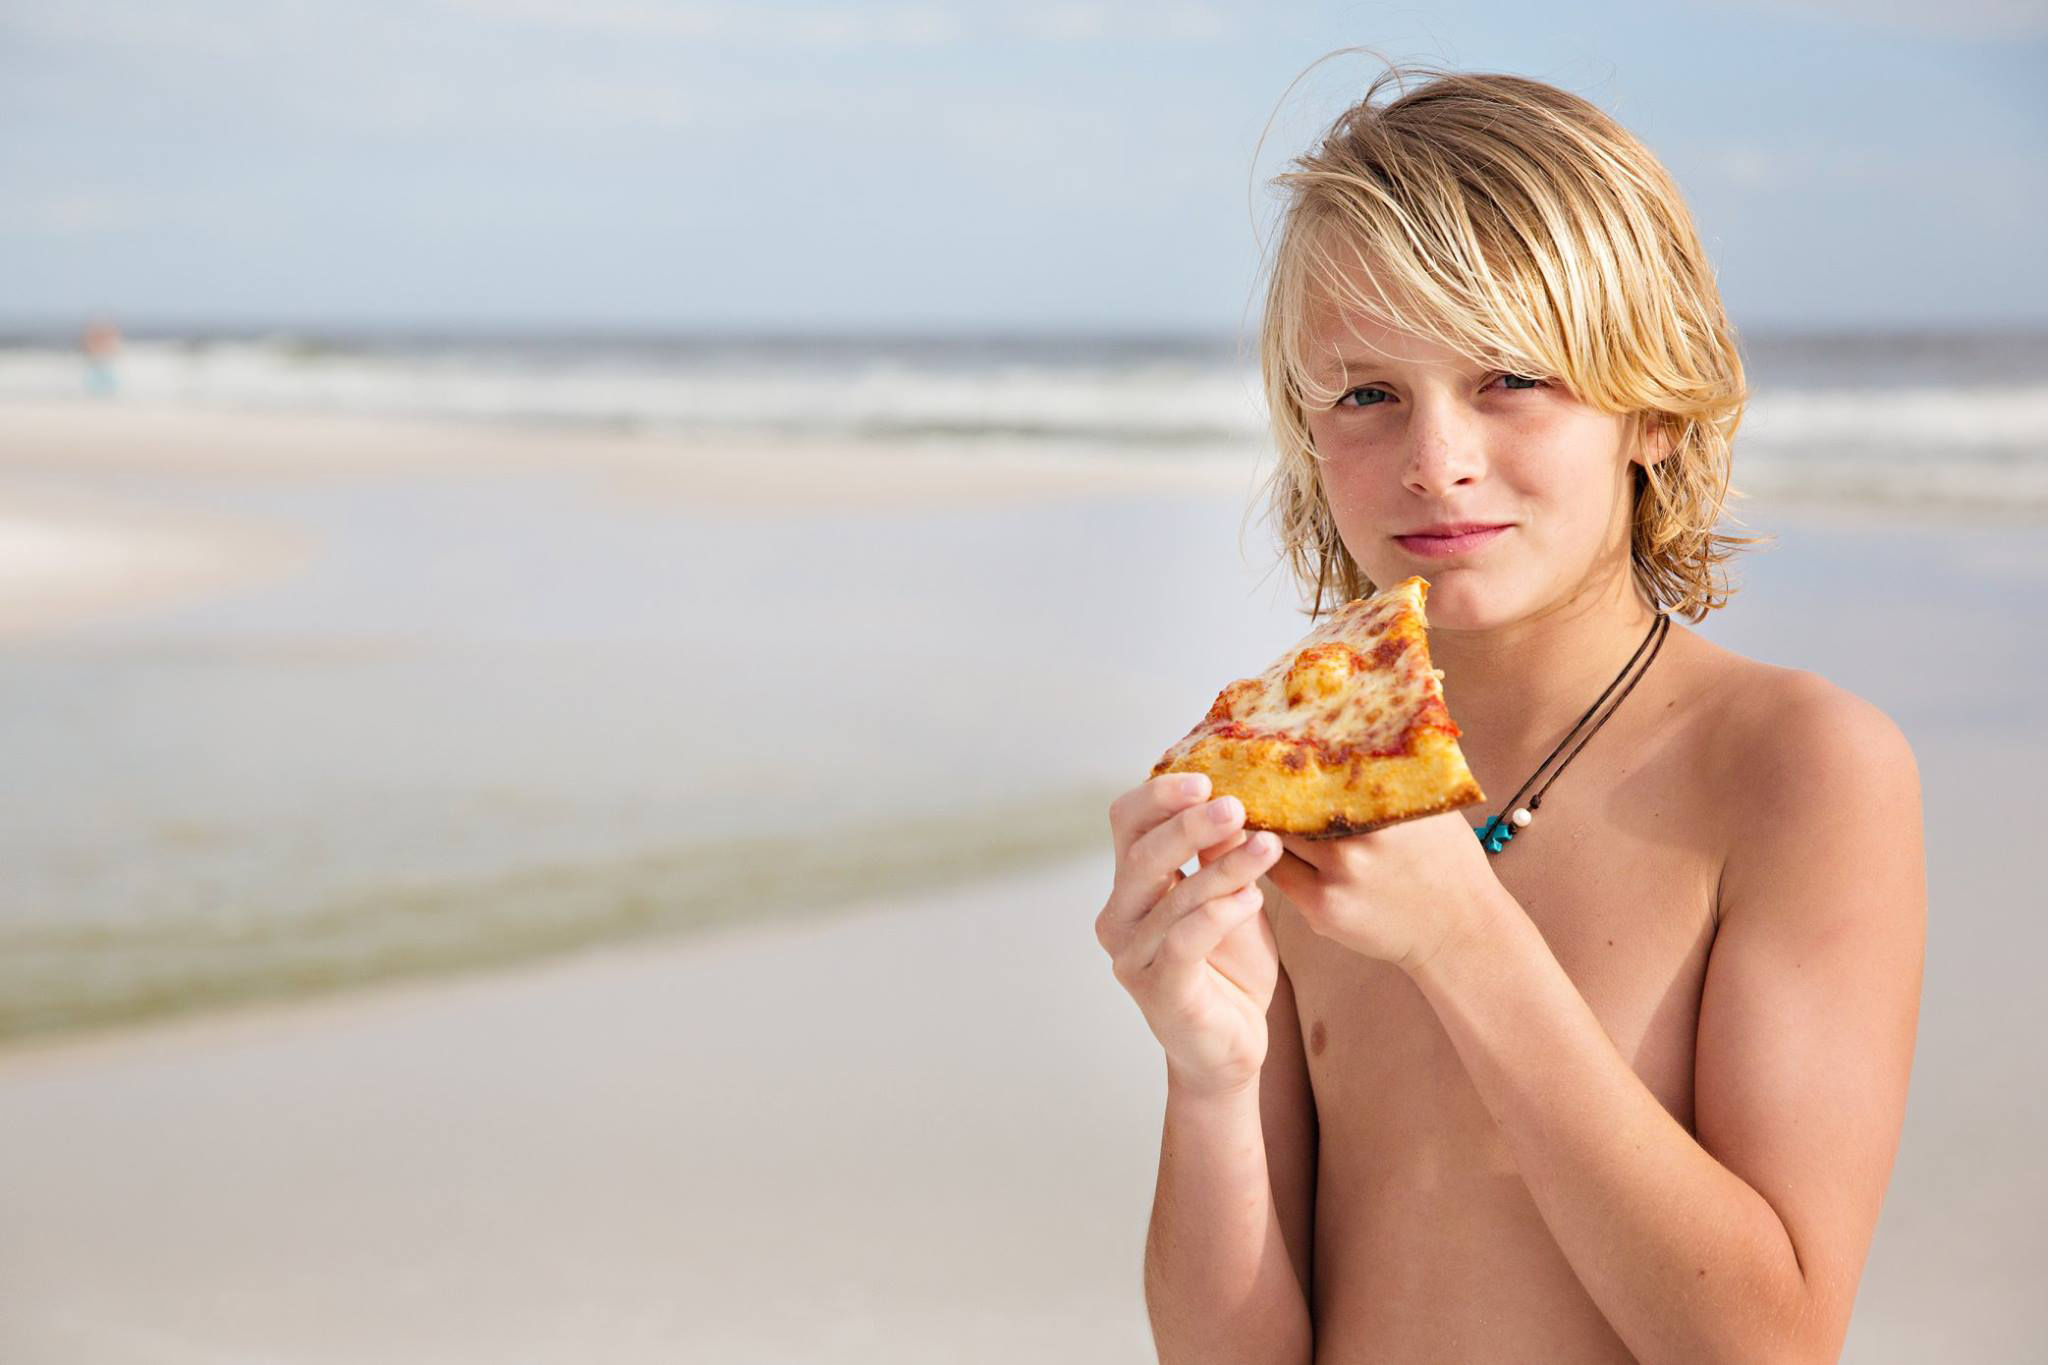 Pizza by the Sea